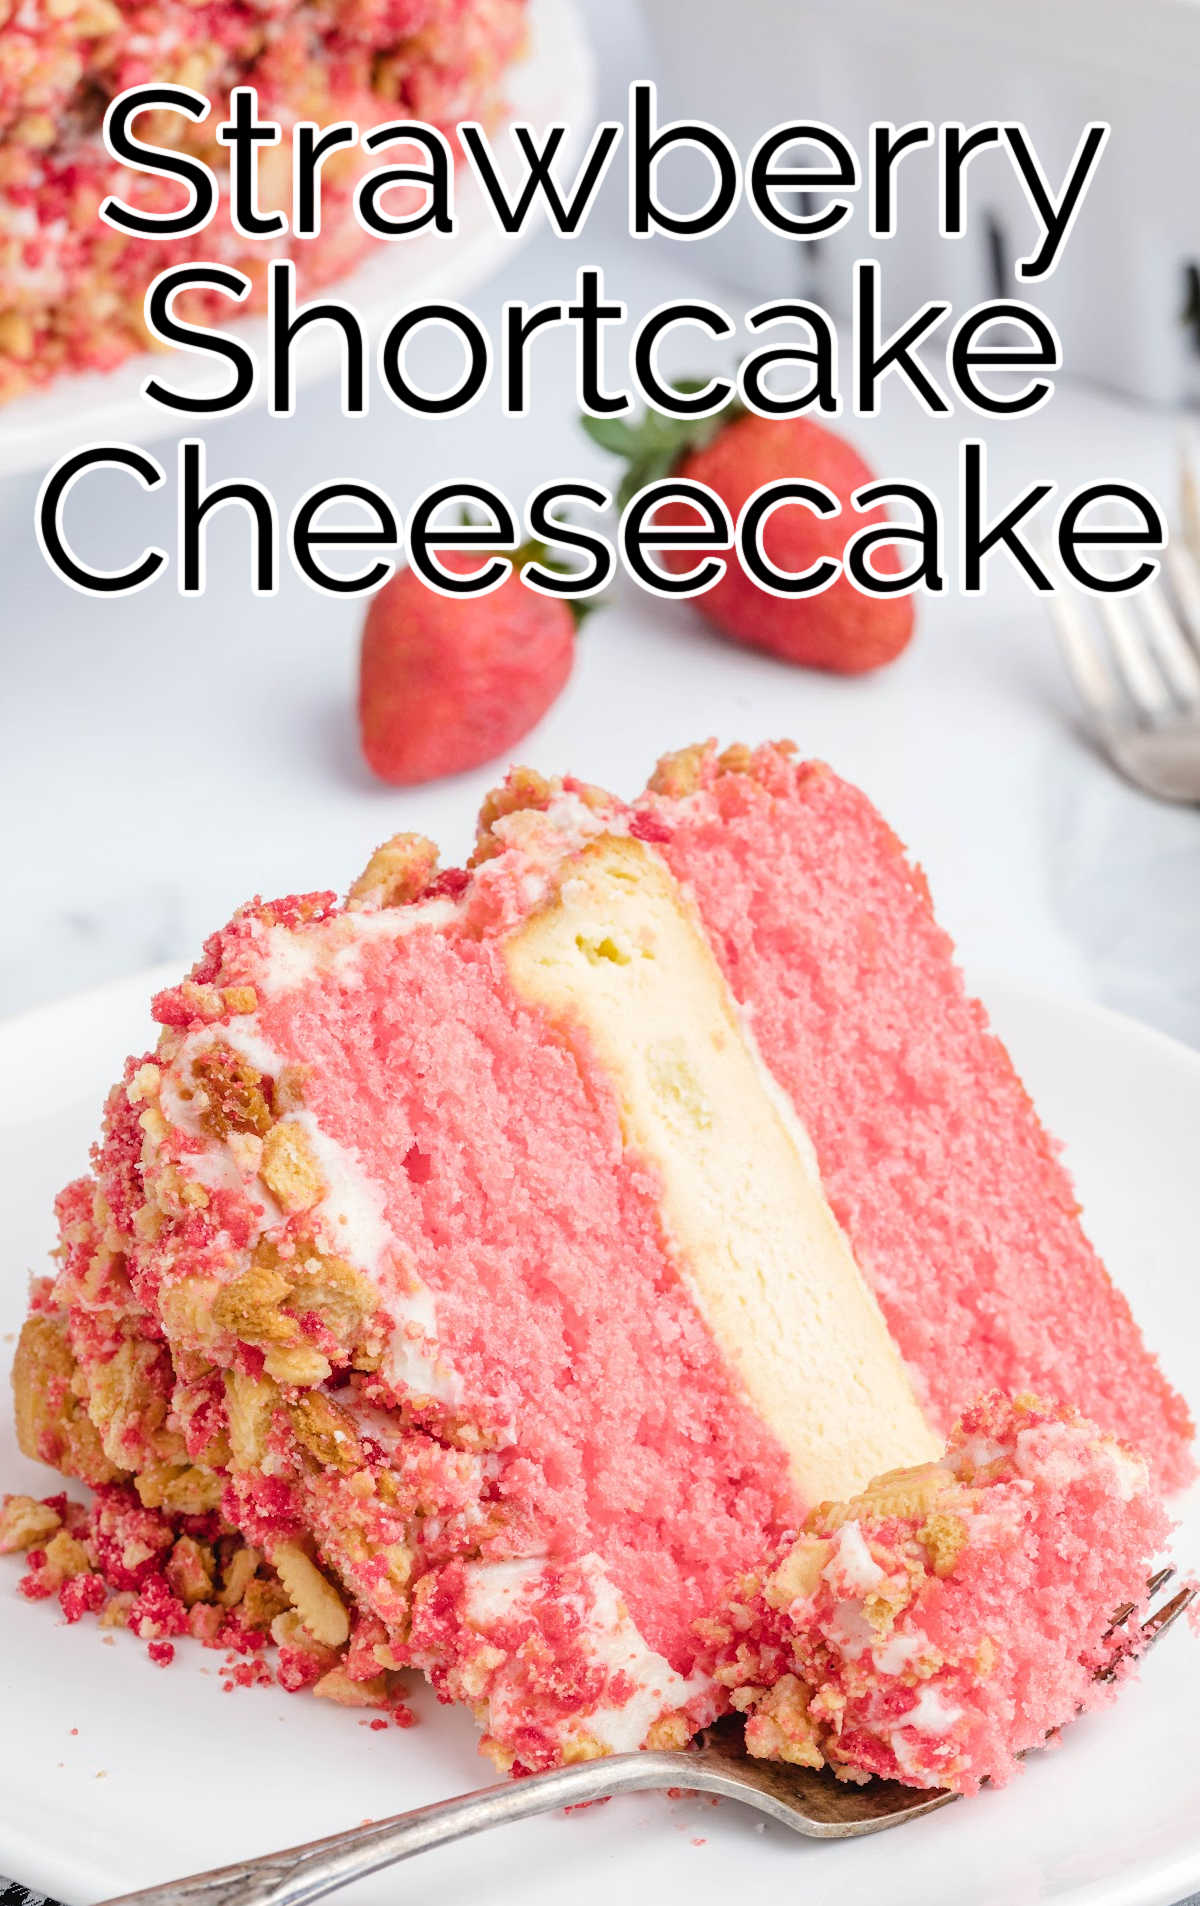 close up shot of a slice of Strawberry Shortcake Cheesecake on a plate with a piece taken out with a fork